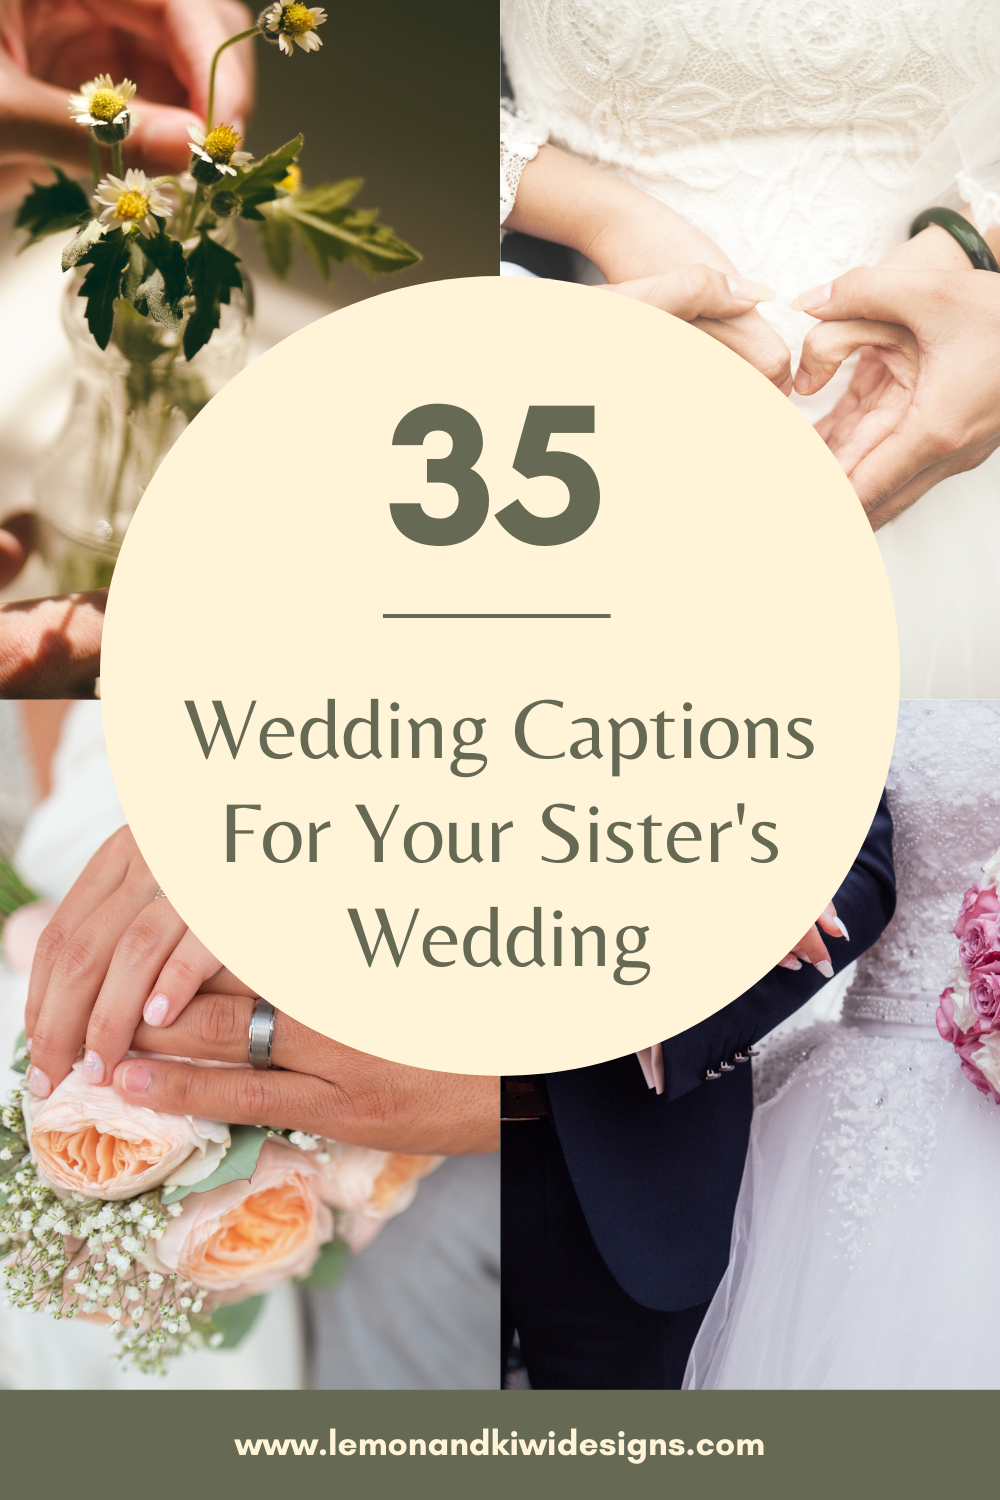 Instagram Wedding Captions for Your Sister’s Wedding